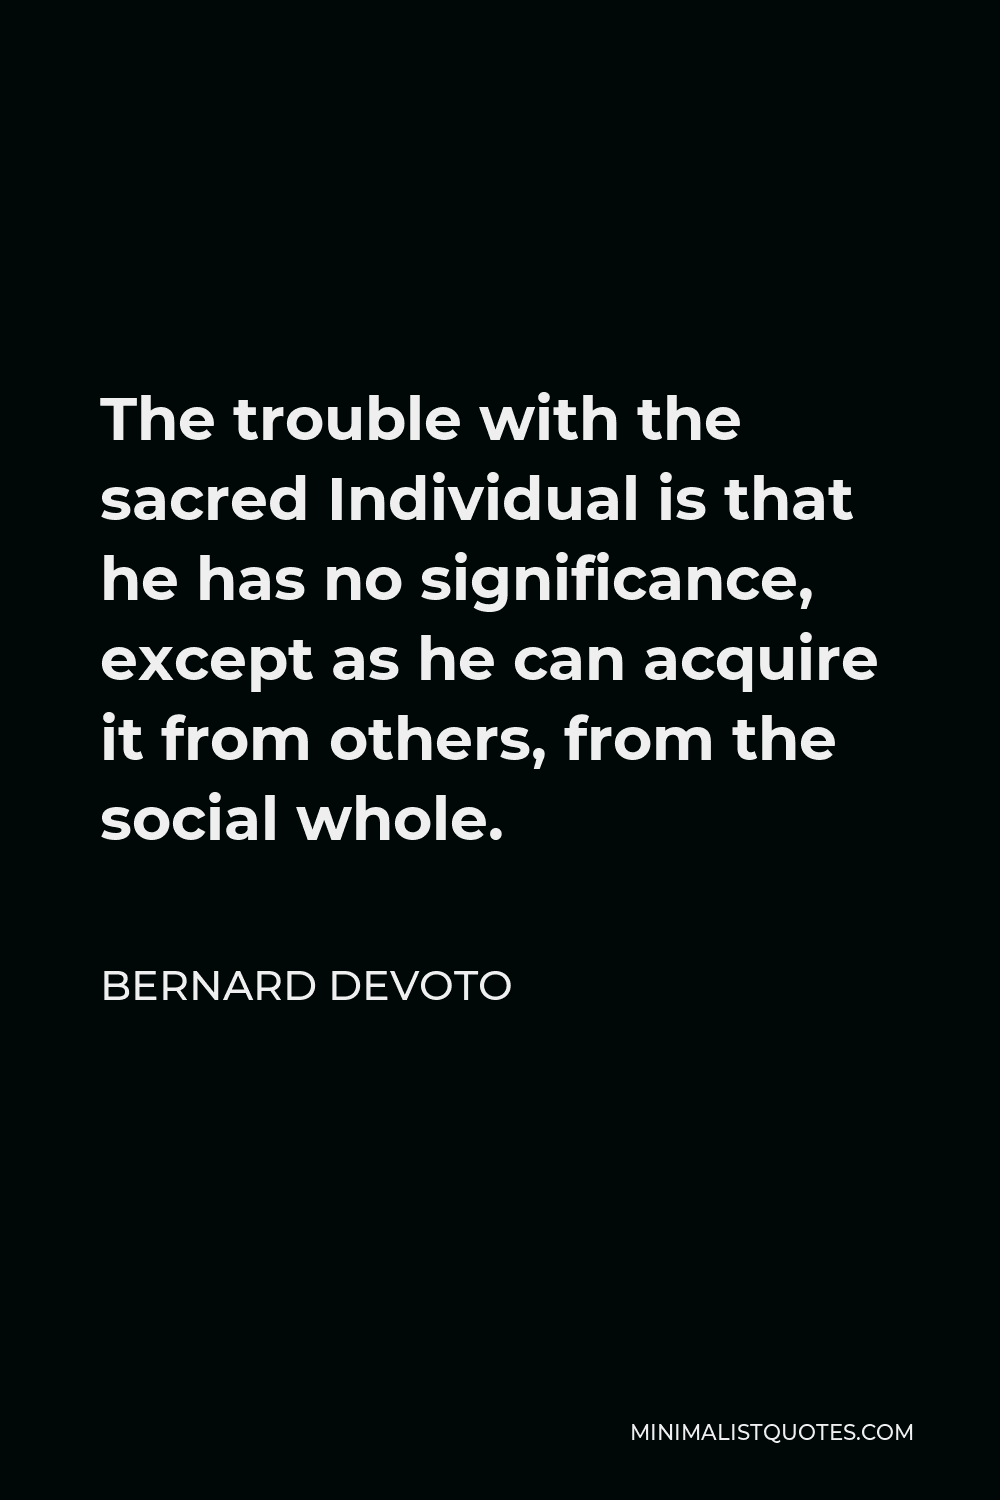 Bernard DeVoto Quote - The trouble with the sacred Individual is that he has no significance, except as he can acquire it from others, from the social whole.